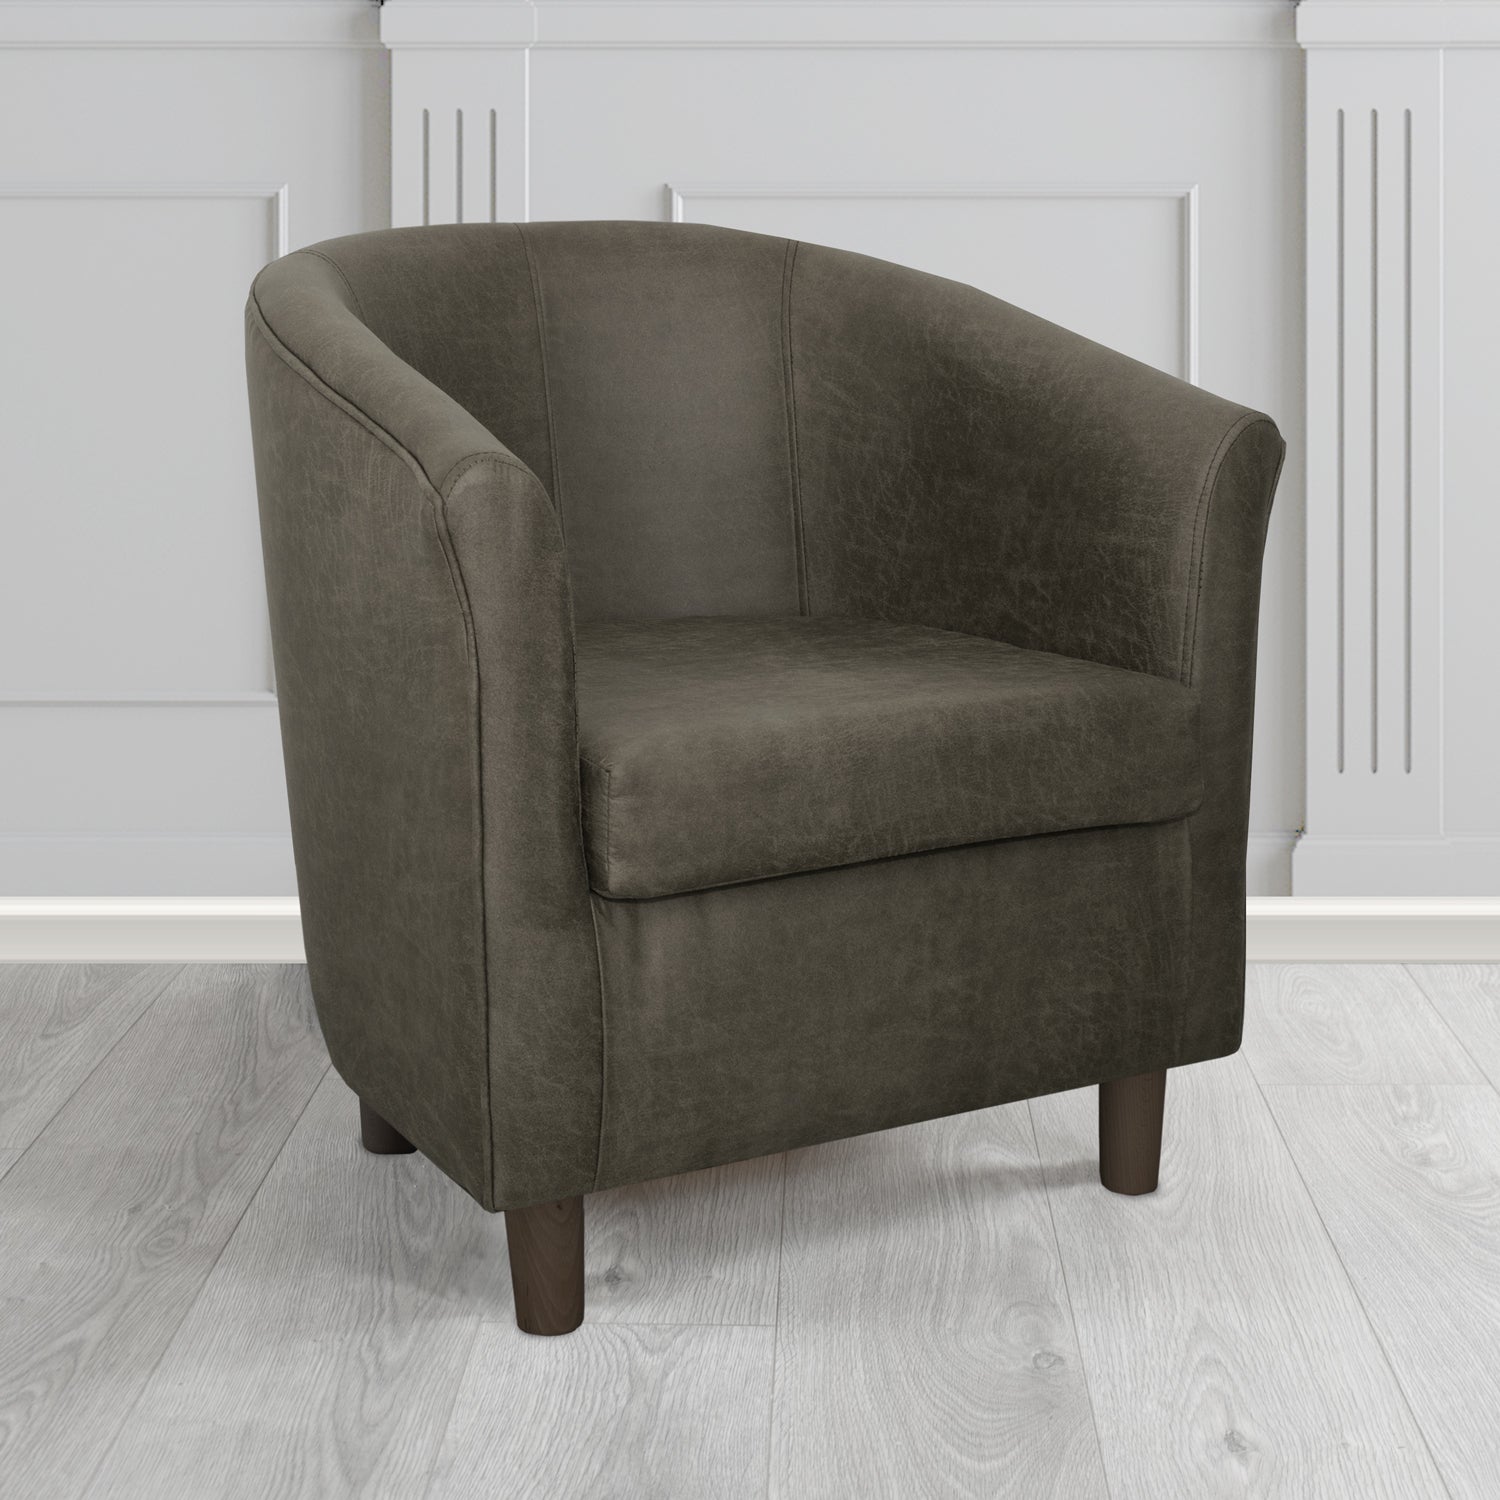 Tuscany Nevada Charcoal Faux Leather Tub Chair - The Tub Chair Shop